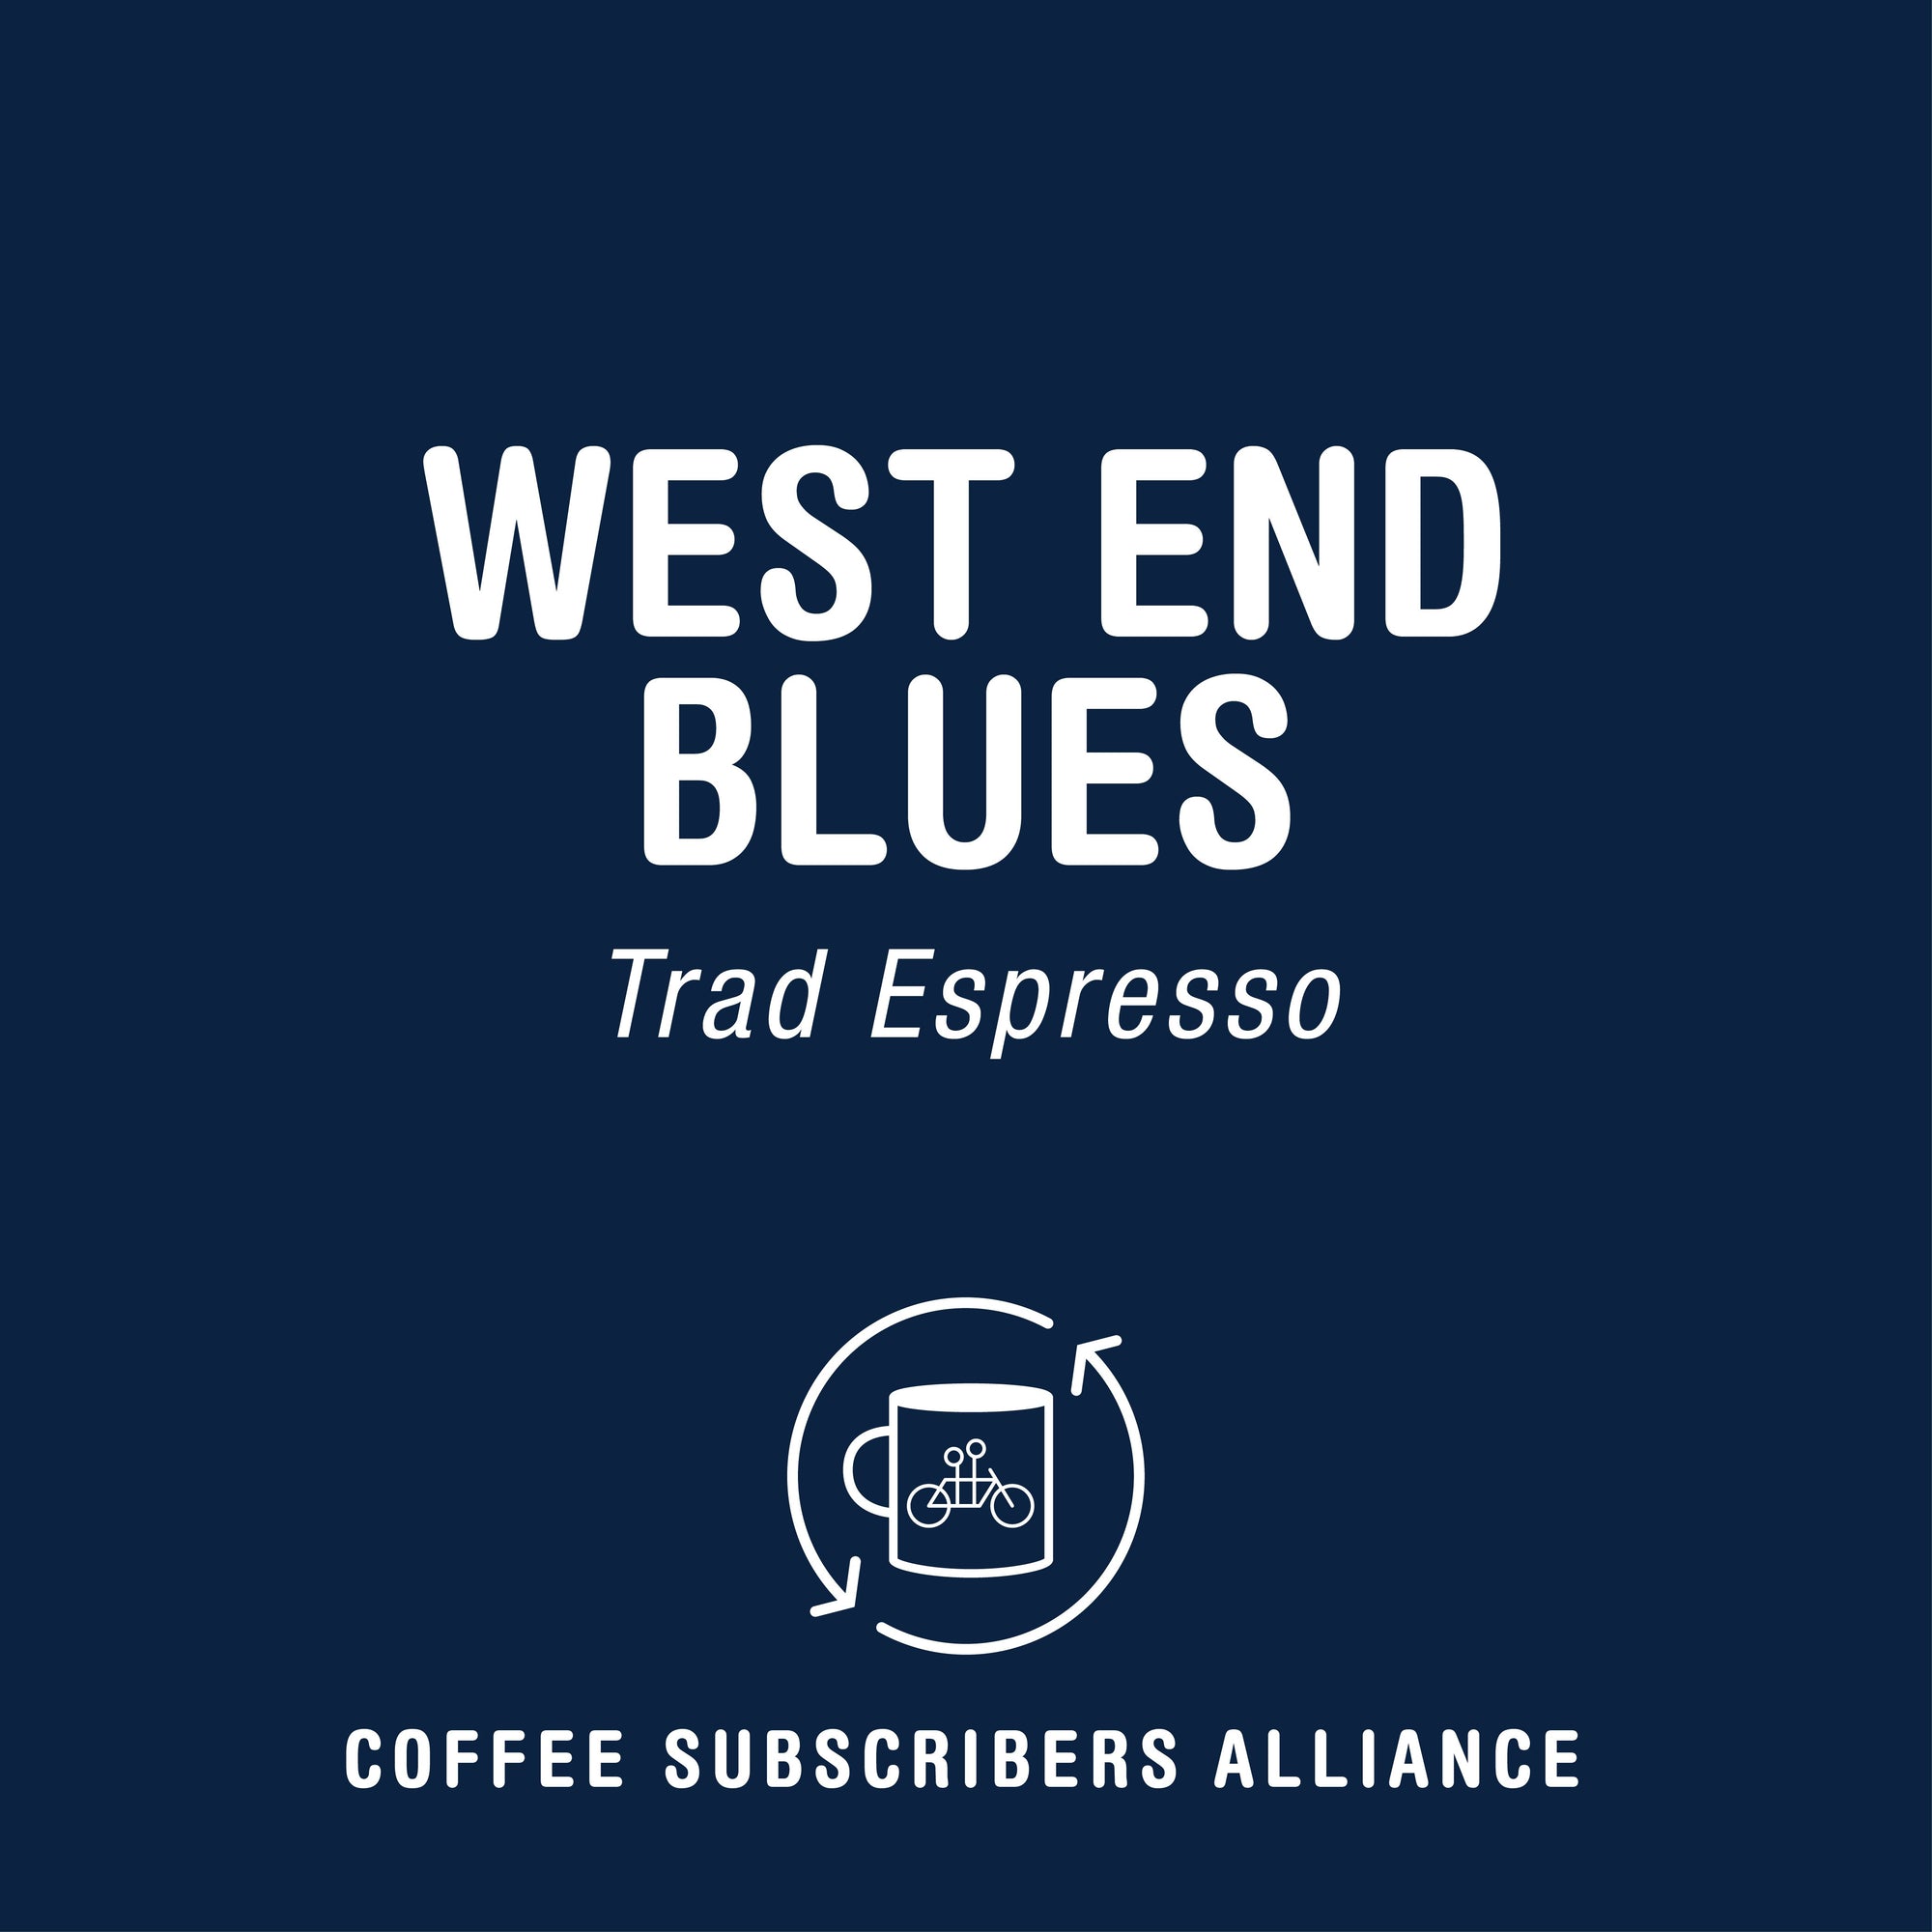 Logo design for "Tandem's West End Blues Subscription," featuring a coffee cup with bicycle wheels on a navy background, associated with the coffee subscription alliance.